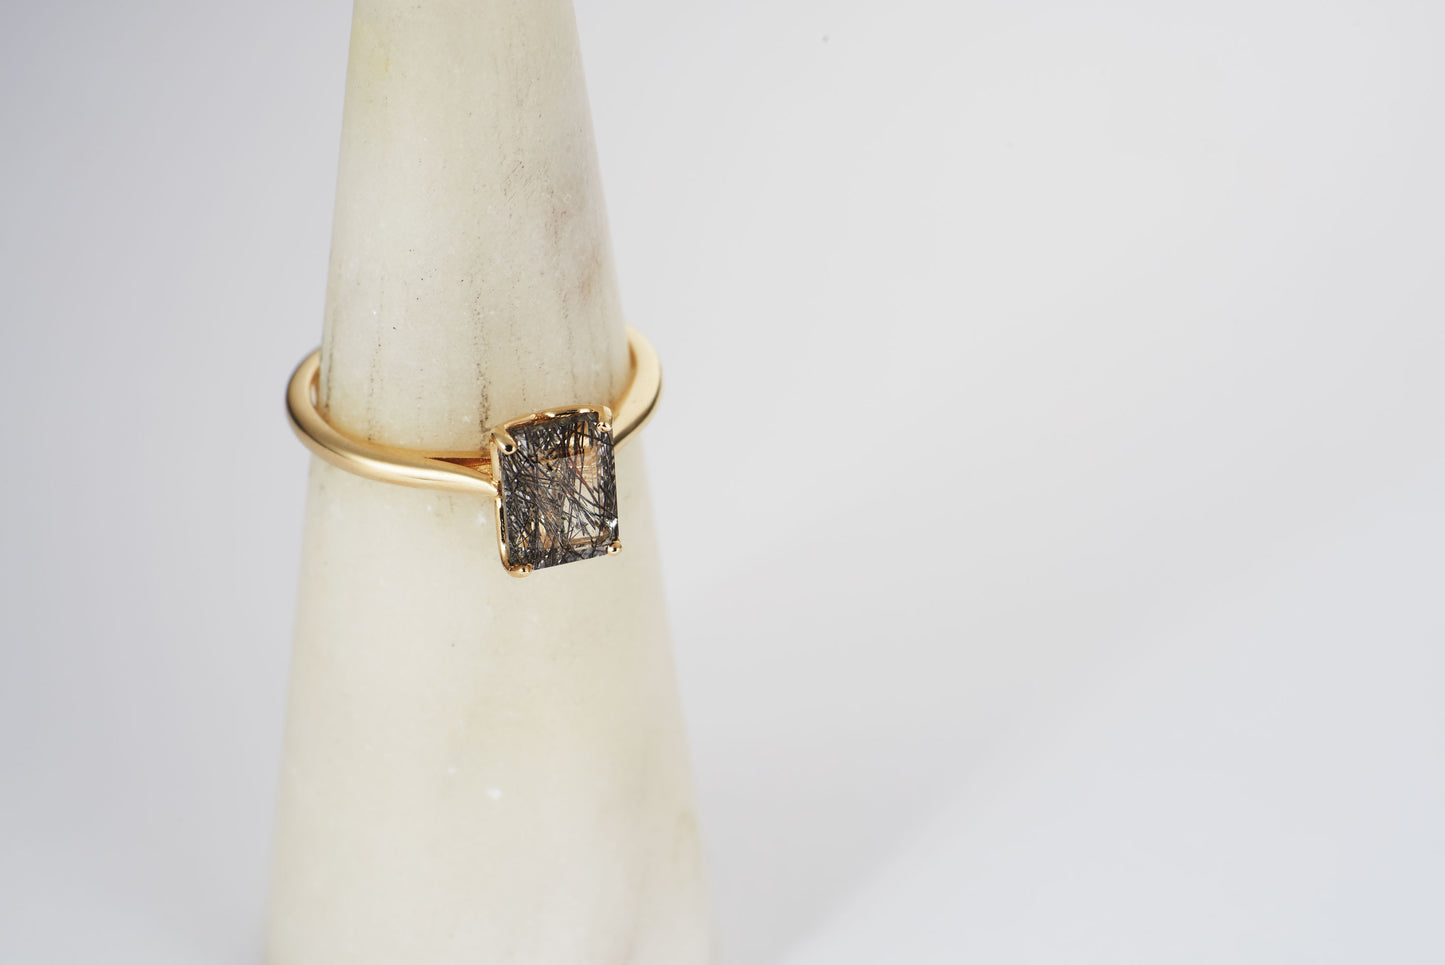 Close up view of the Nico rutile quartz solitaire ring on a ring cone.